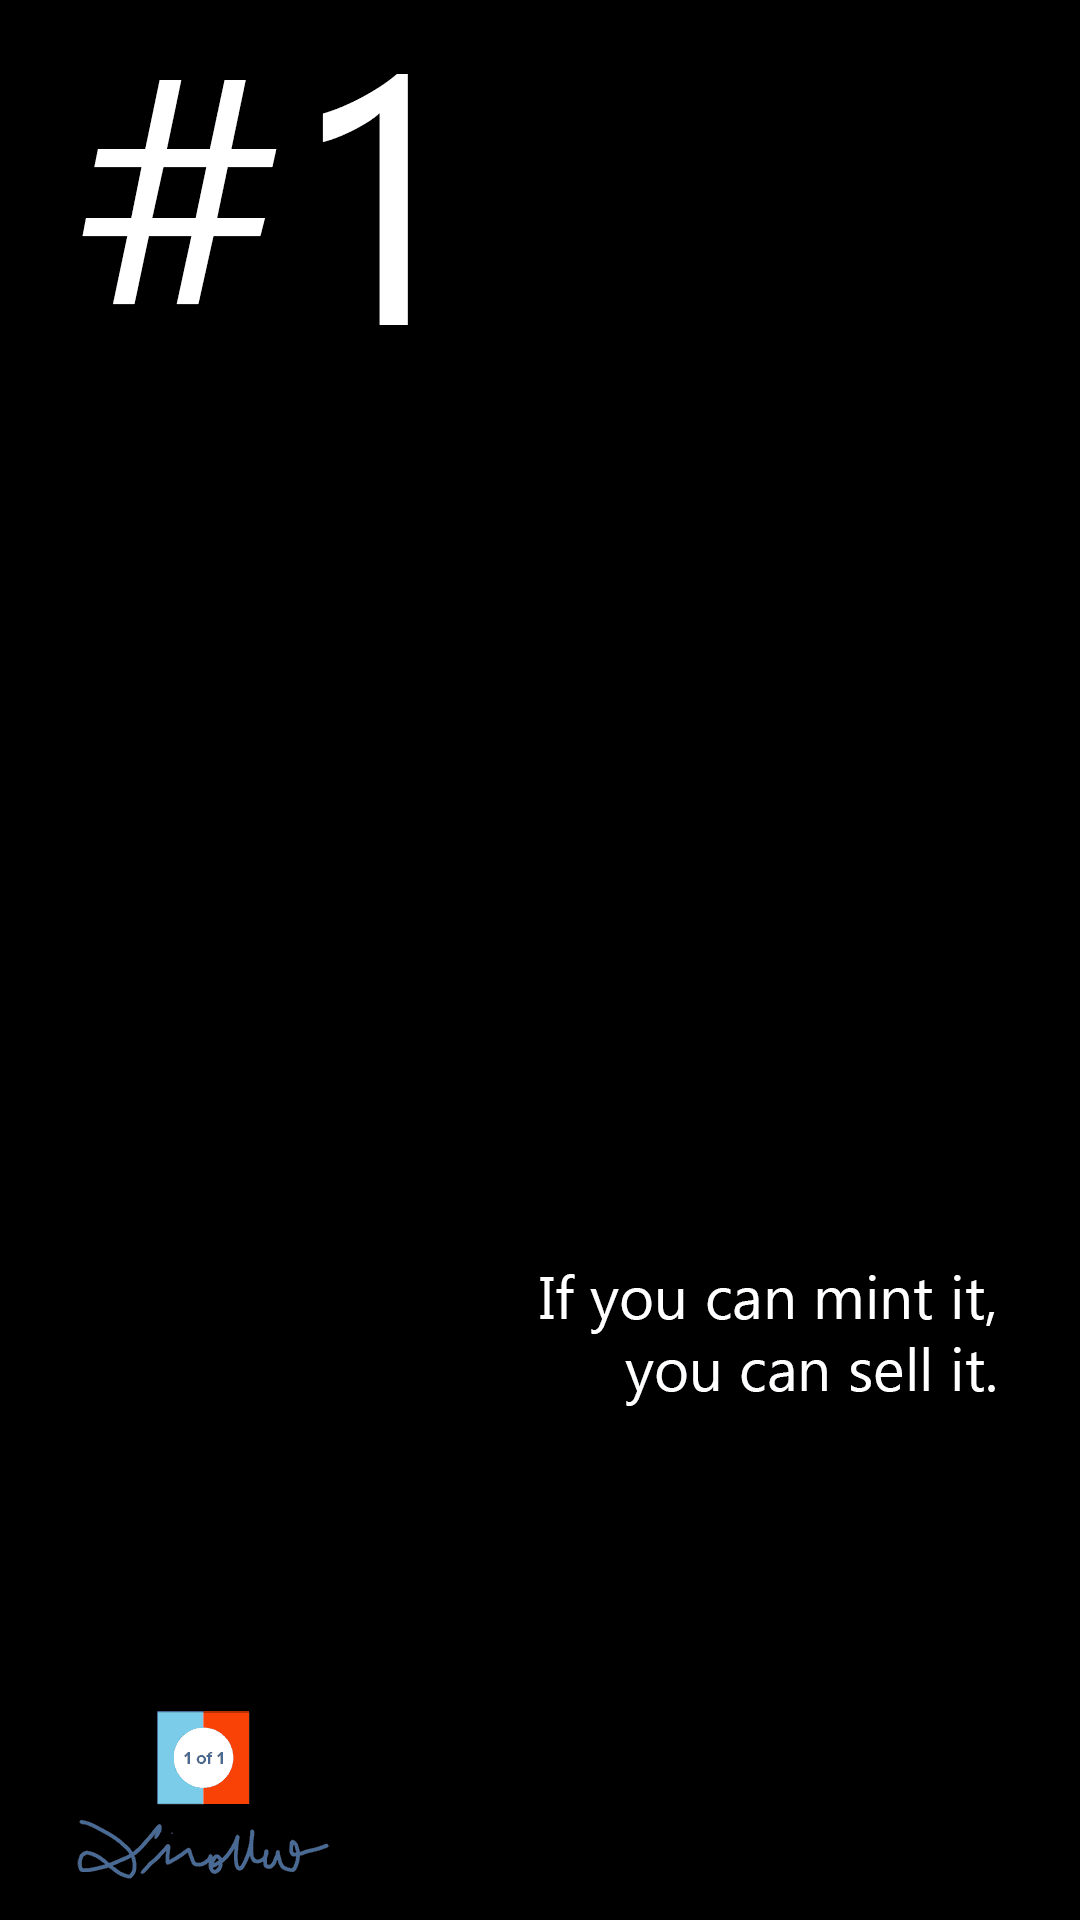 If you can mint it, you can sell it - No. 1